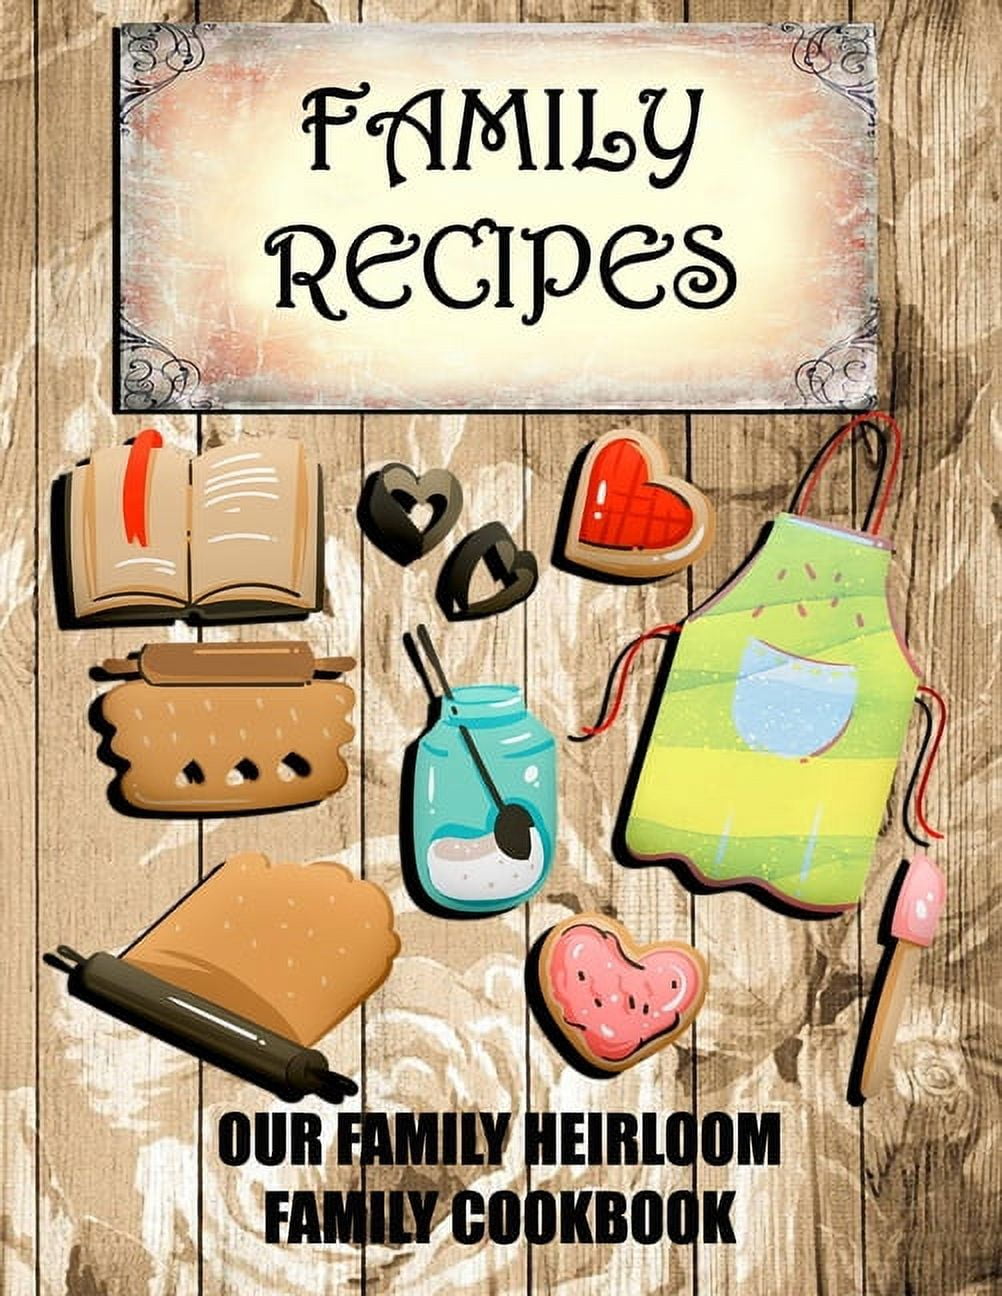 Our Family Recipes Book (Make Your Own Cookbook) - books & magazines - by  owner - sale - craigslist